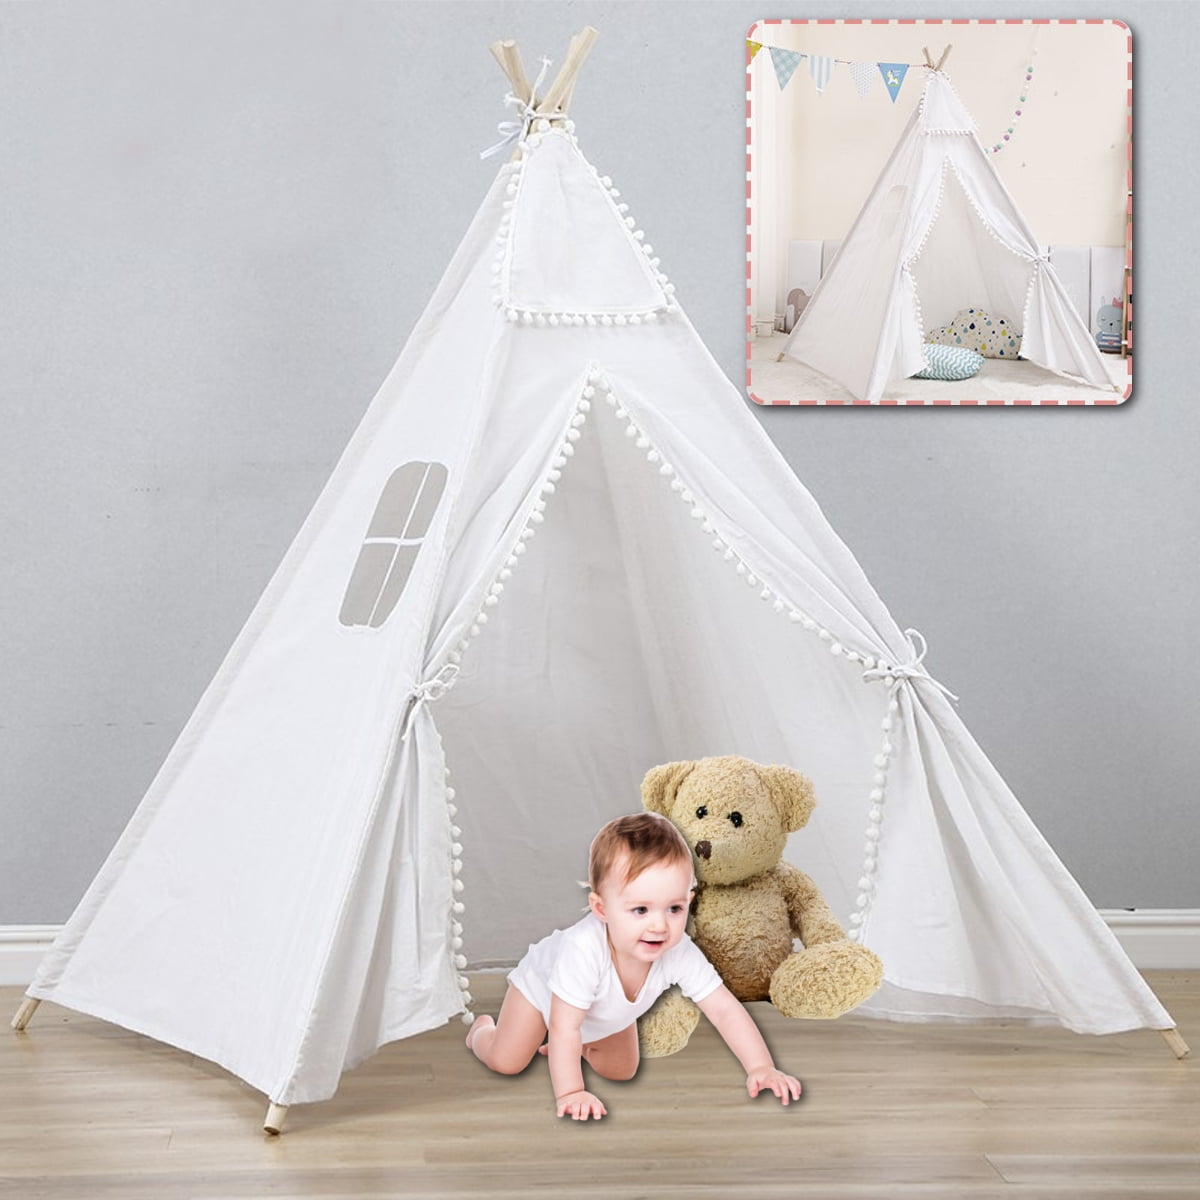 Indian Teepee Play Tent Kids Canvas Playhouse Children Sleeping Dome Huge White 